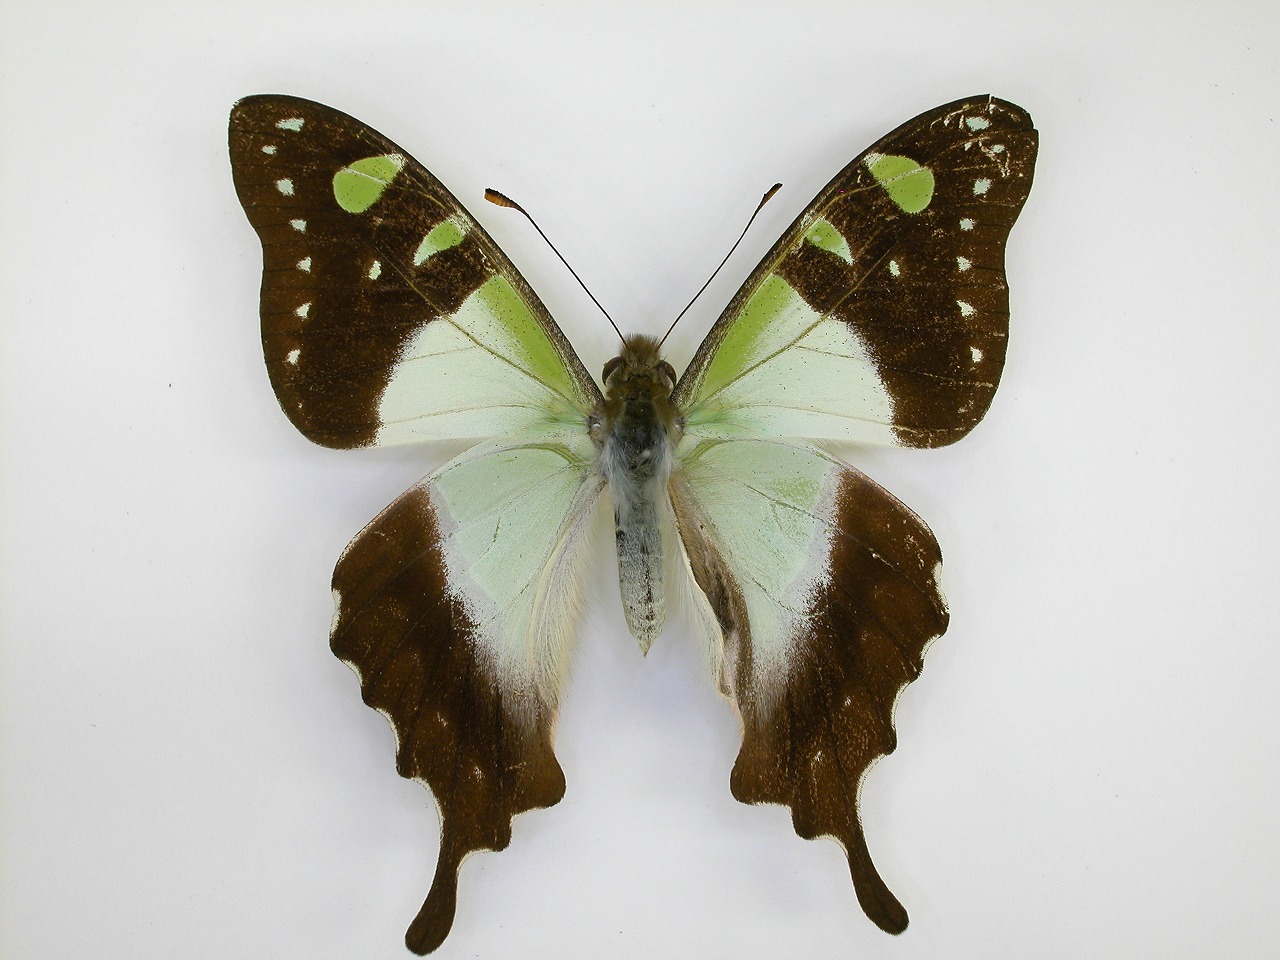 https://www.hitohaku.jp/material/l-material/butterfly-wing/1-papilionidae/B1-269891_A.jpg